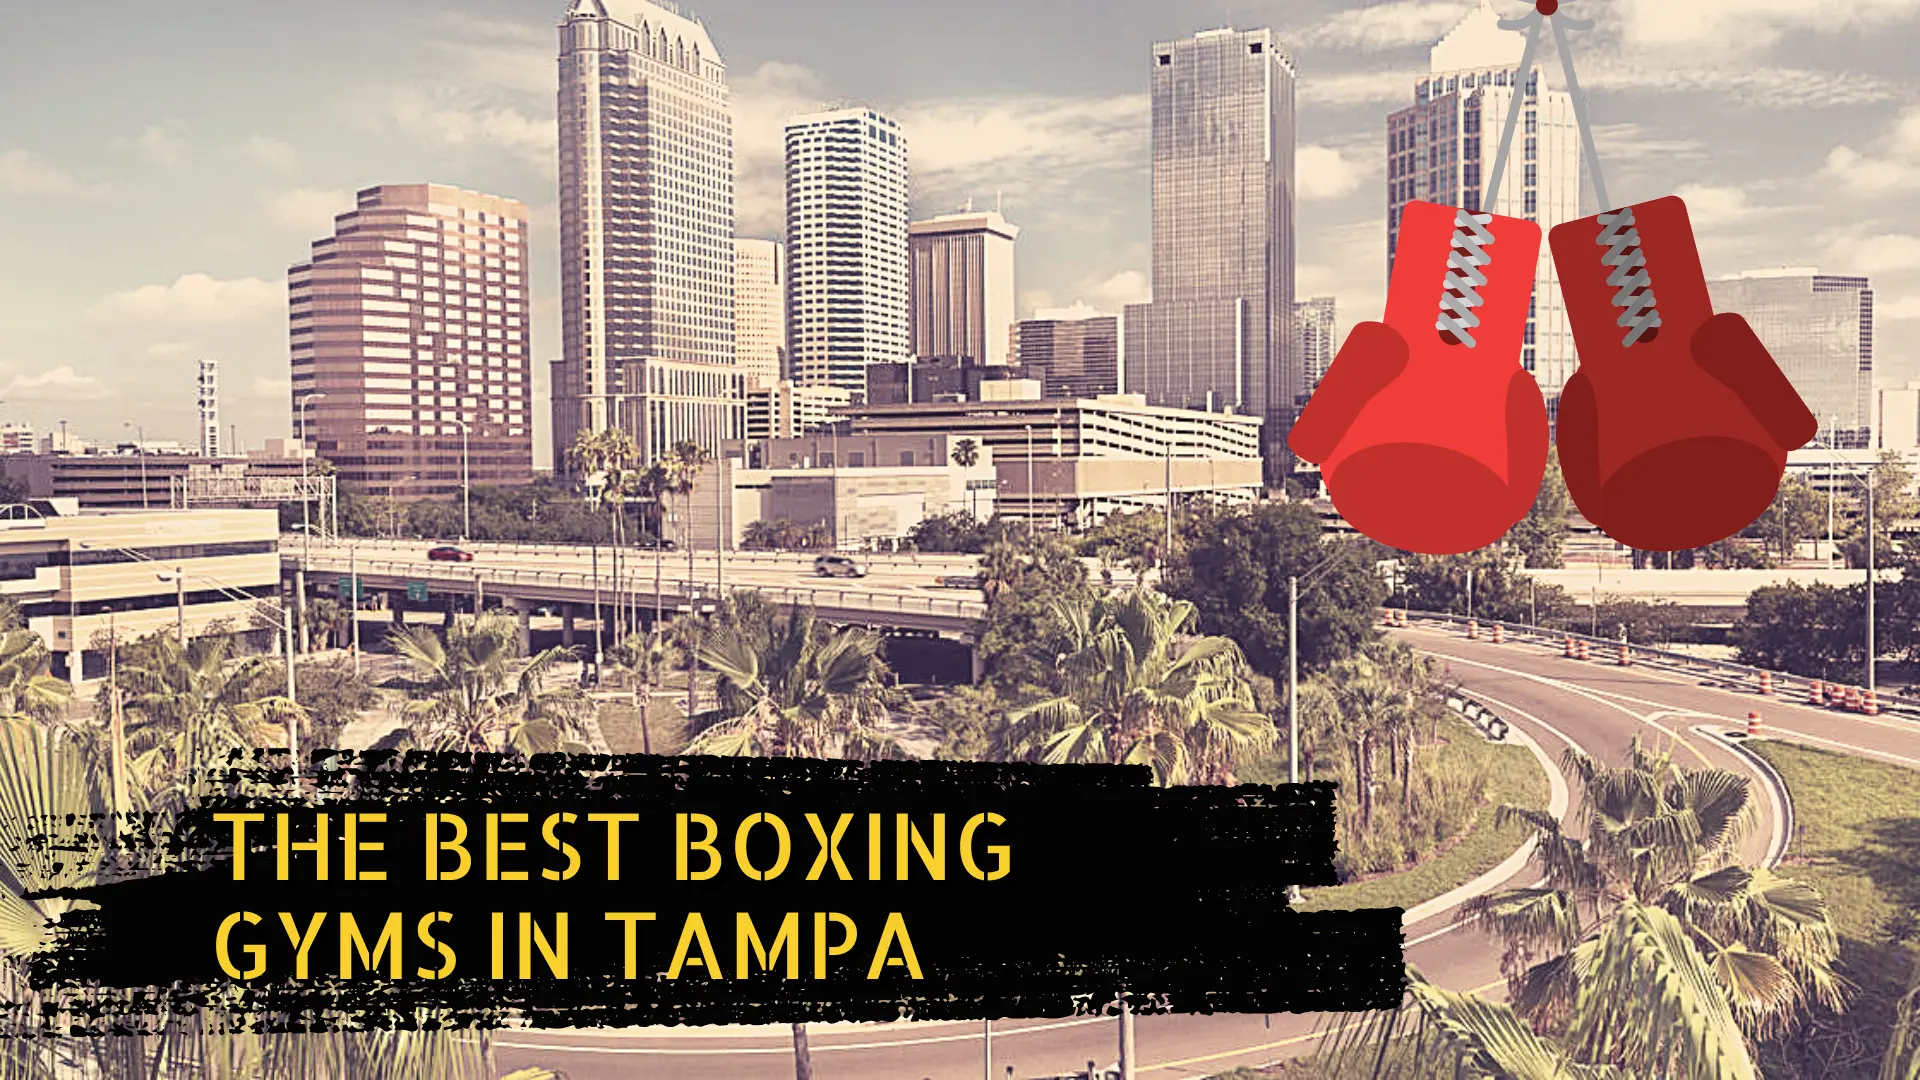 A skyline of Tampa and some boxing gloves with the title "Best boxing gyms in Tampa"